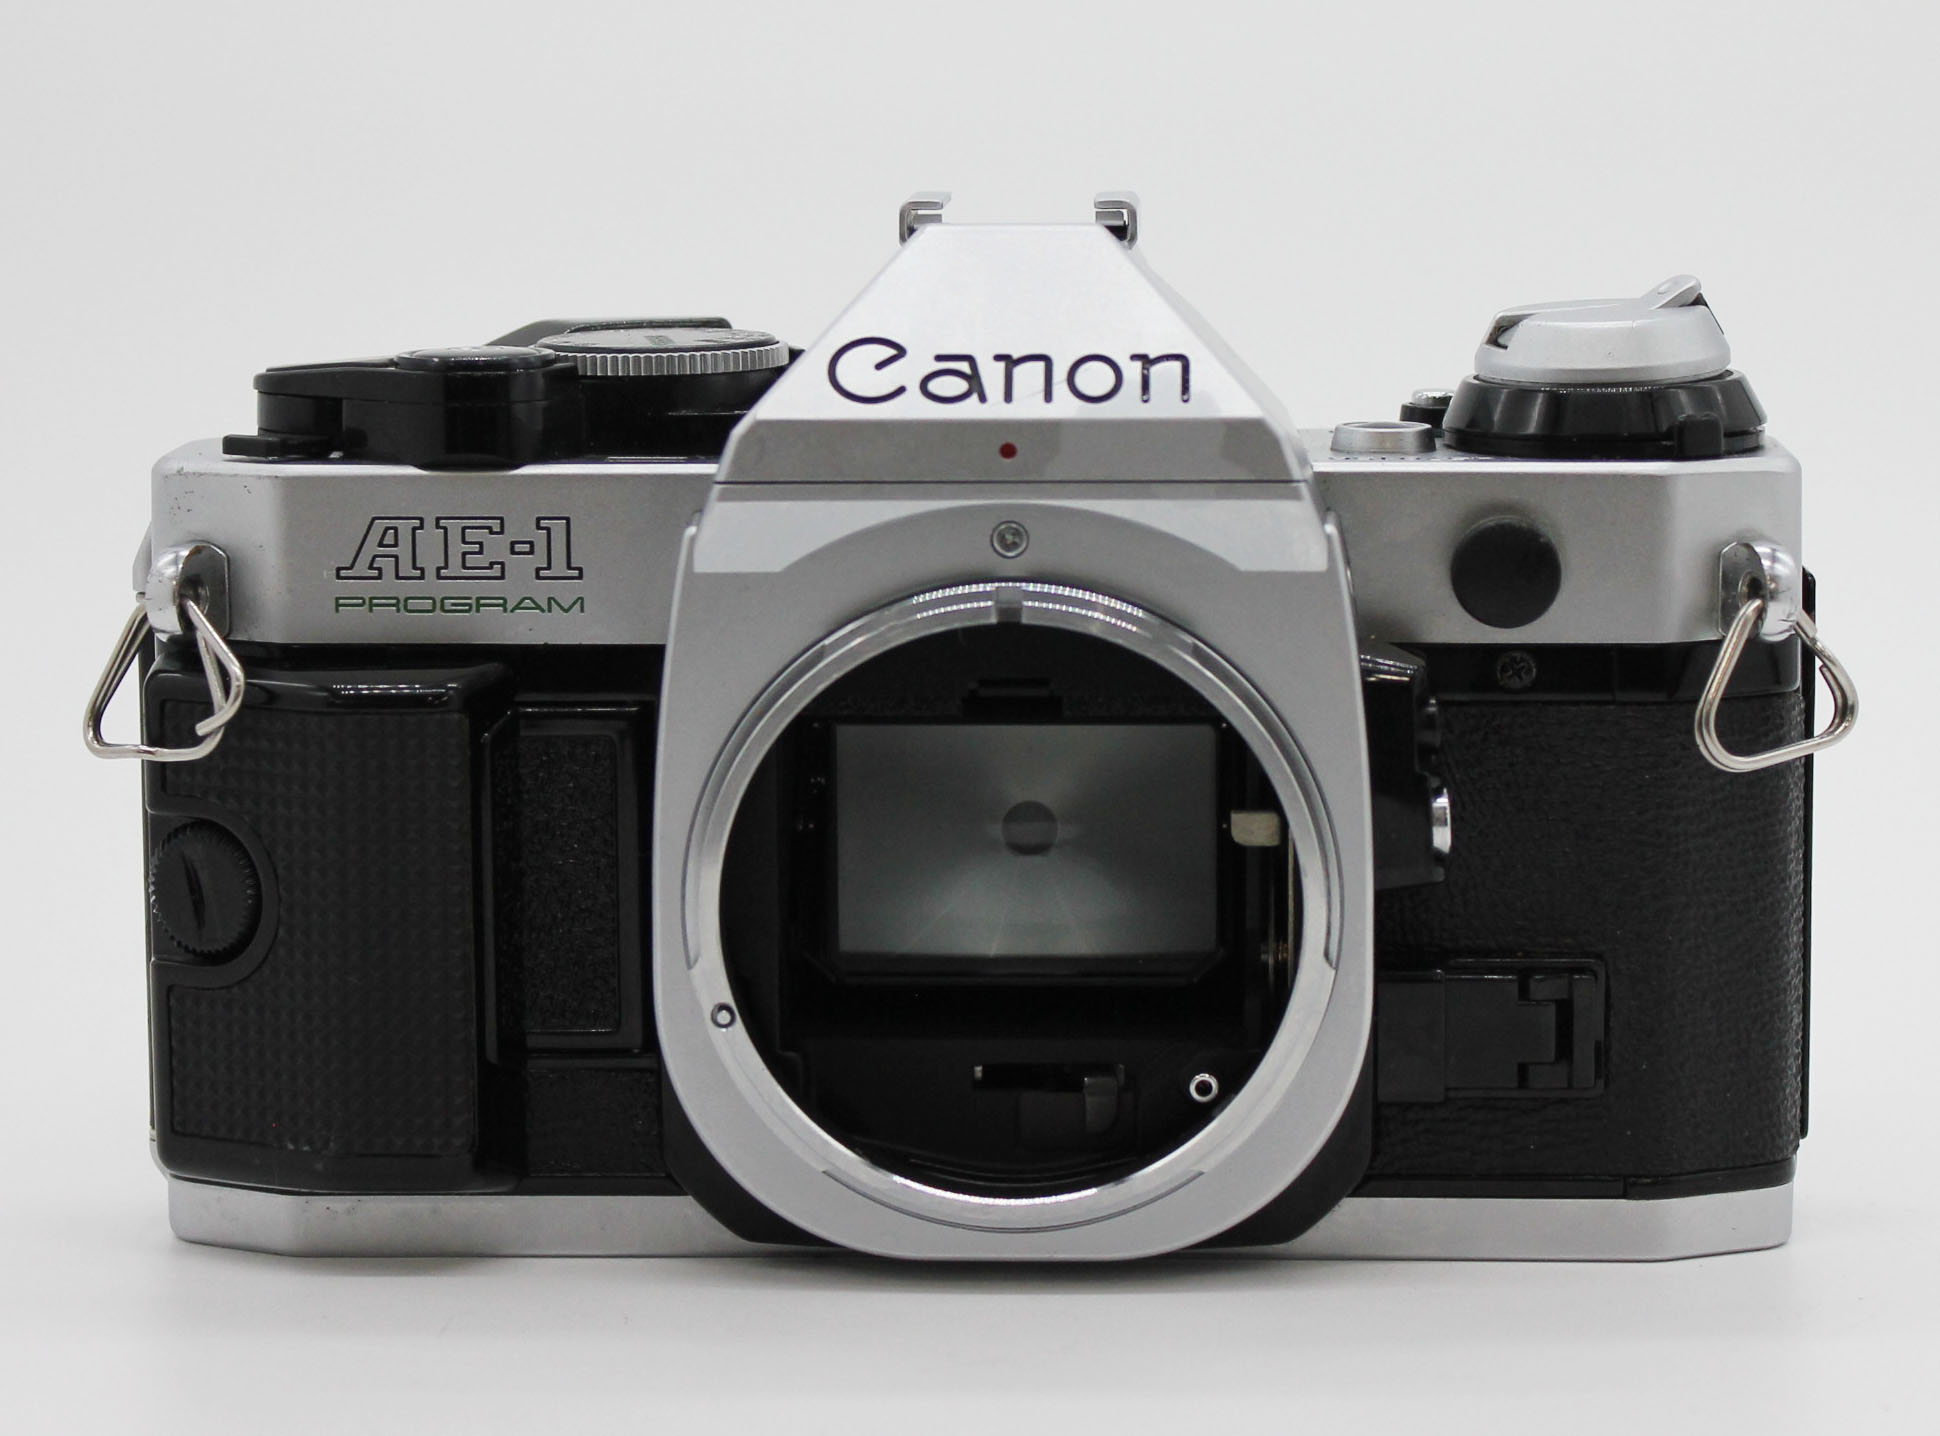 Canon AE-1 Program 35mm SLR Film Camera with New FD NFD 50mm F/1.4 Lens from Japan Photo 3